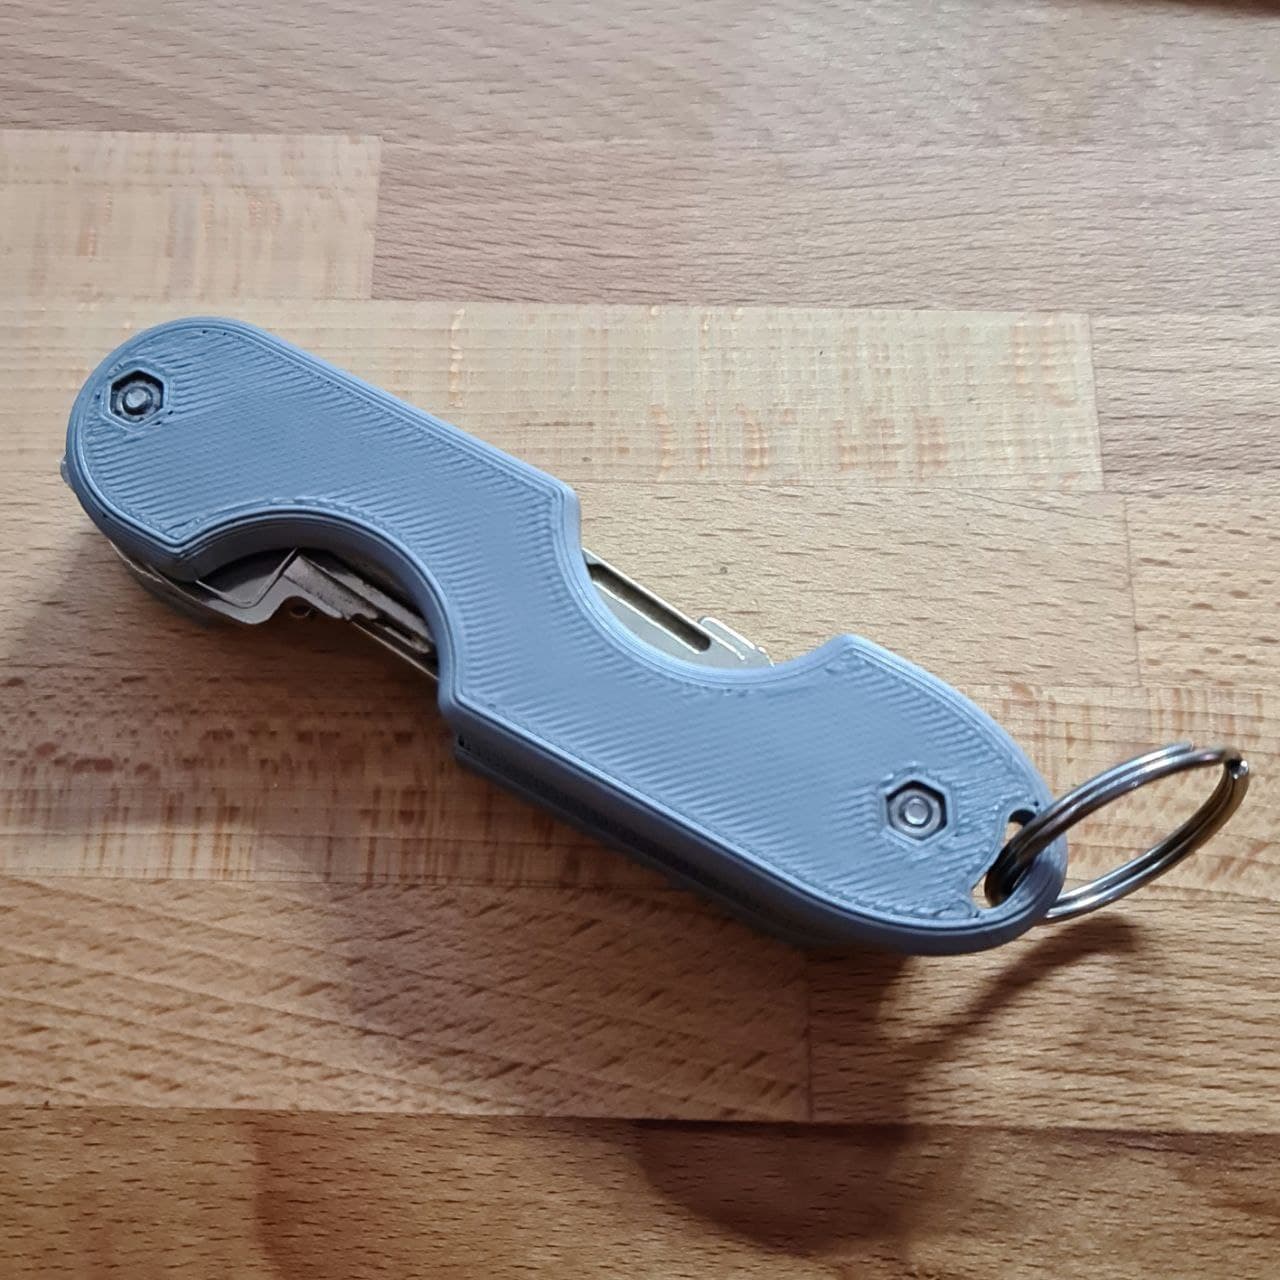 Remixed Swiss Key Holder with hole for a ring